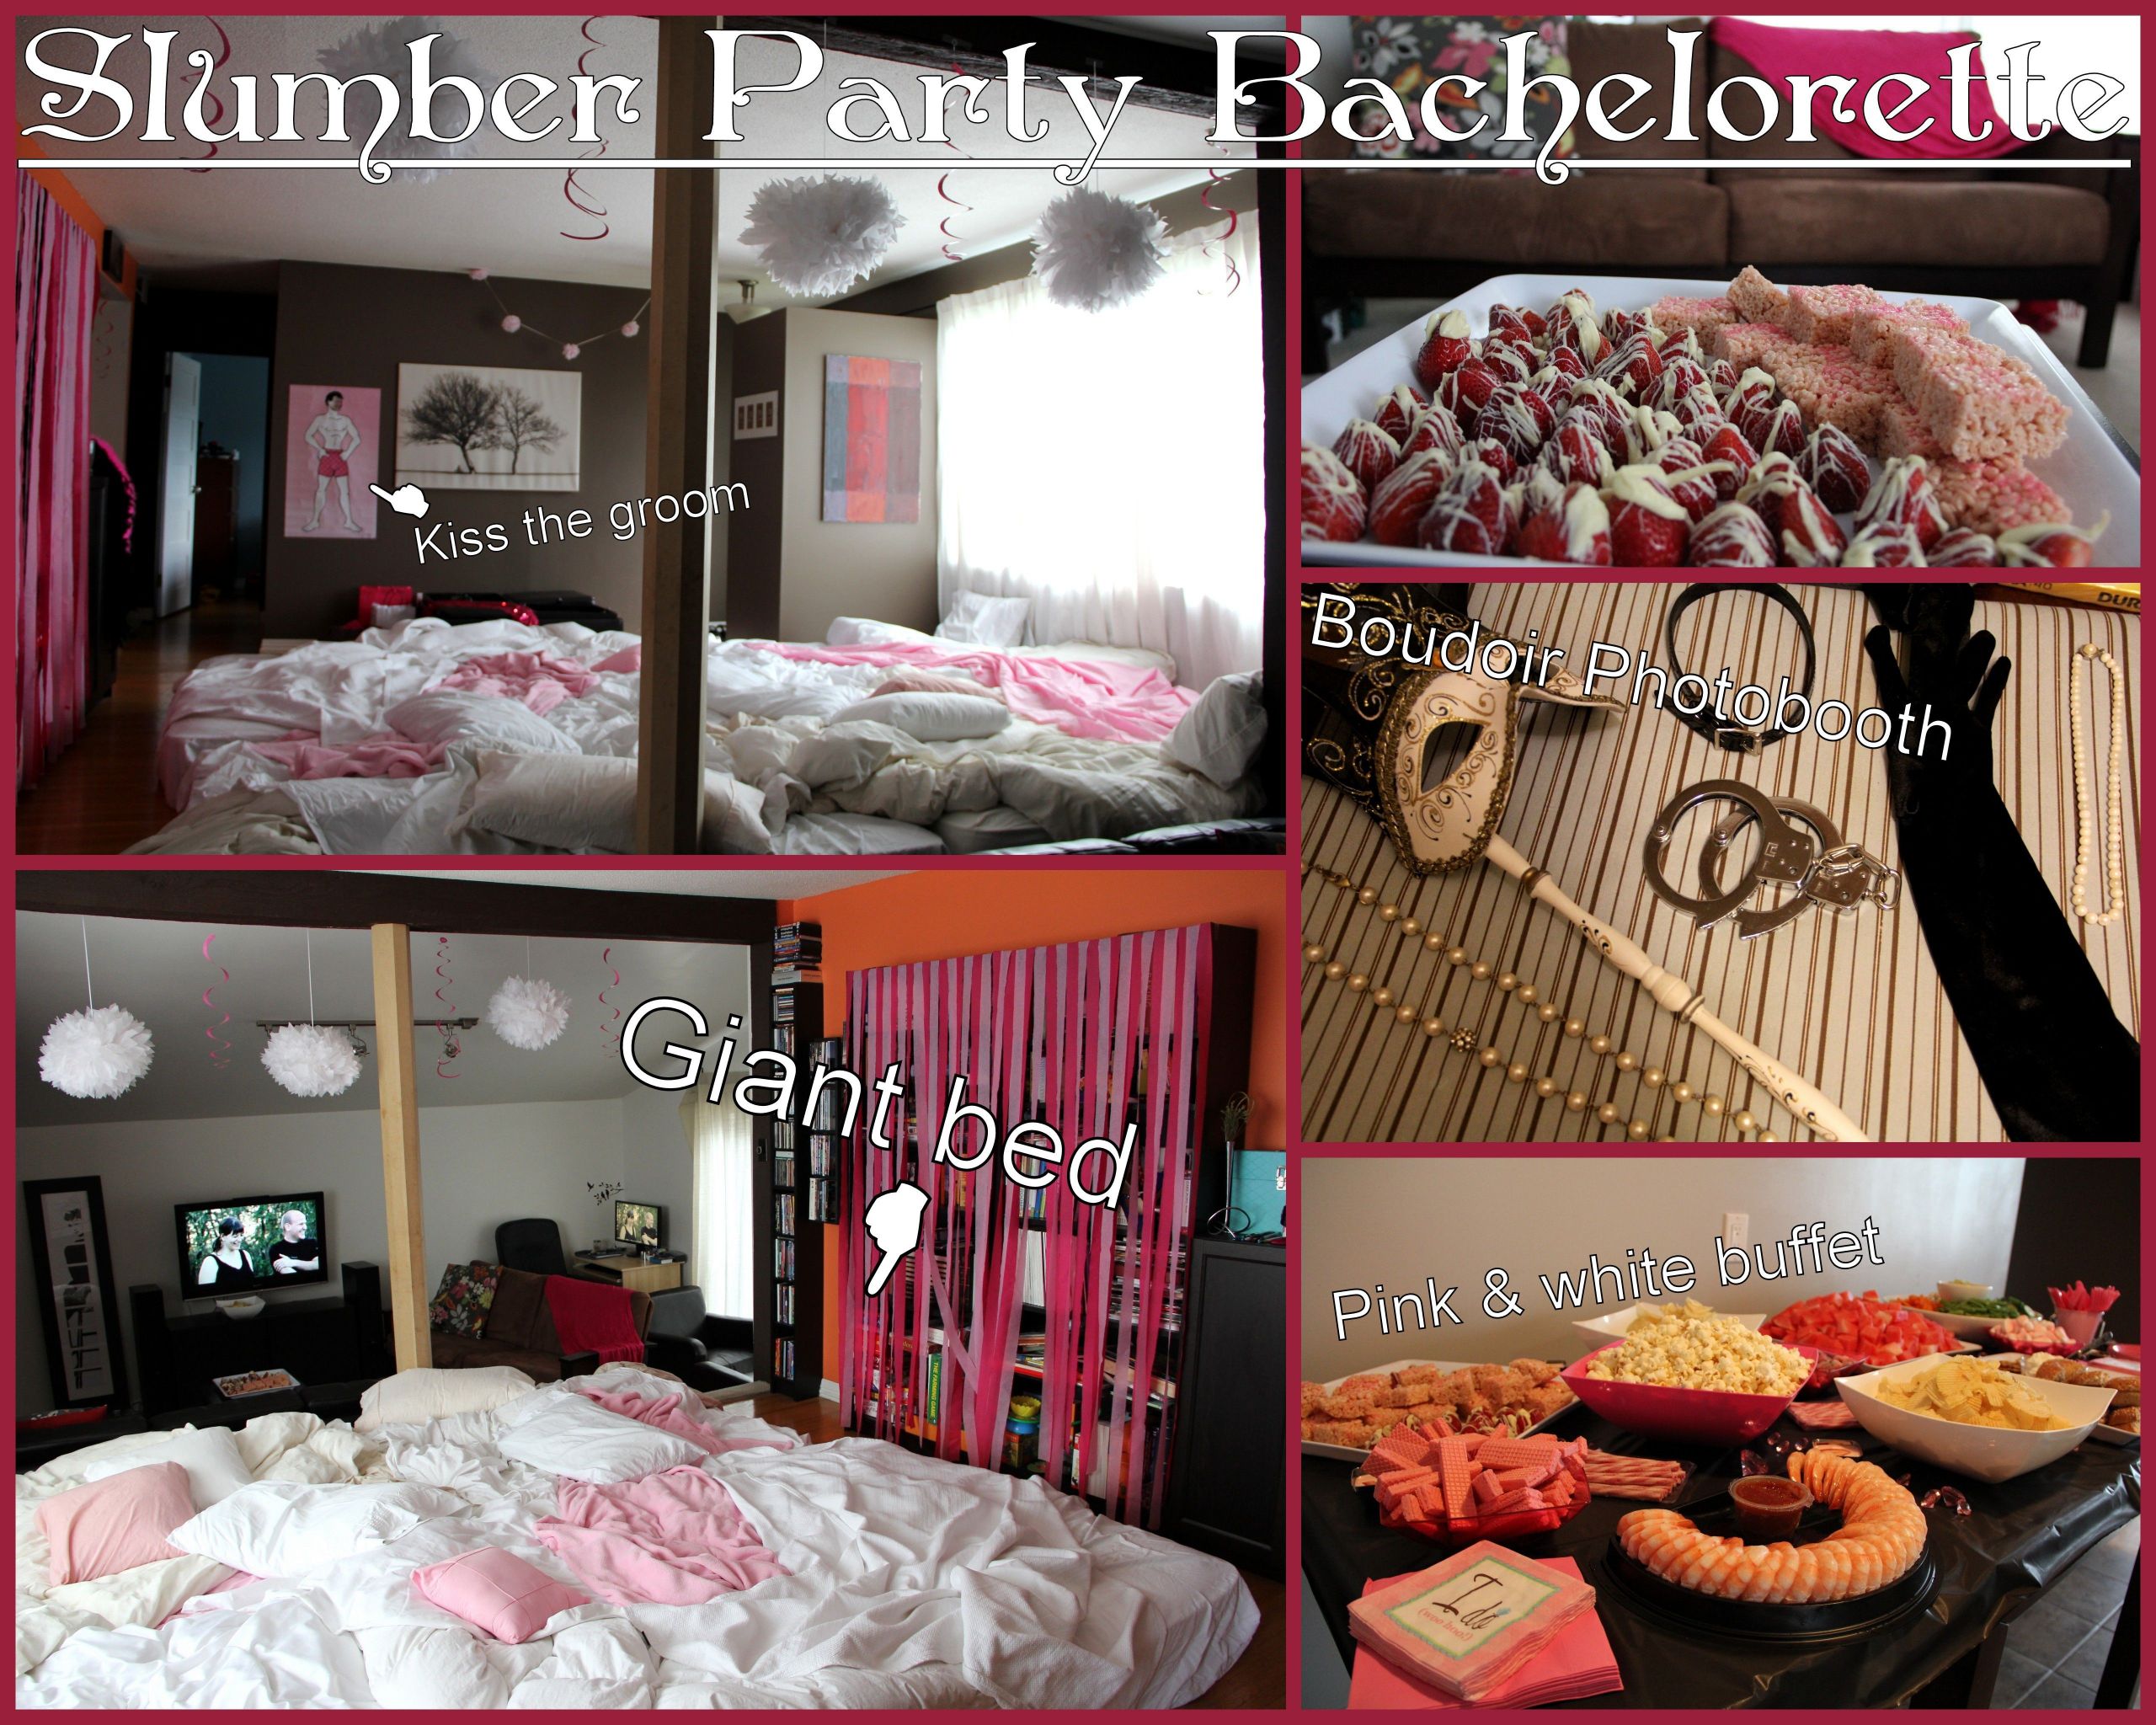 Bachelorette Slumber Party Ideas
 Slumber Party Bachelorette I moved all the furniture out